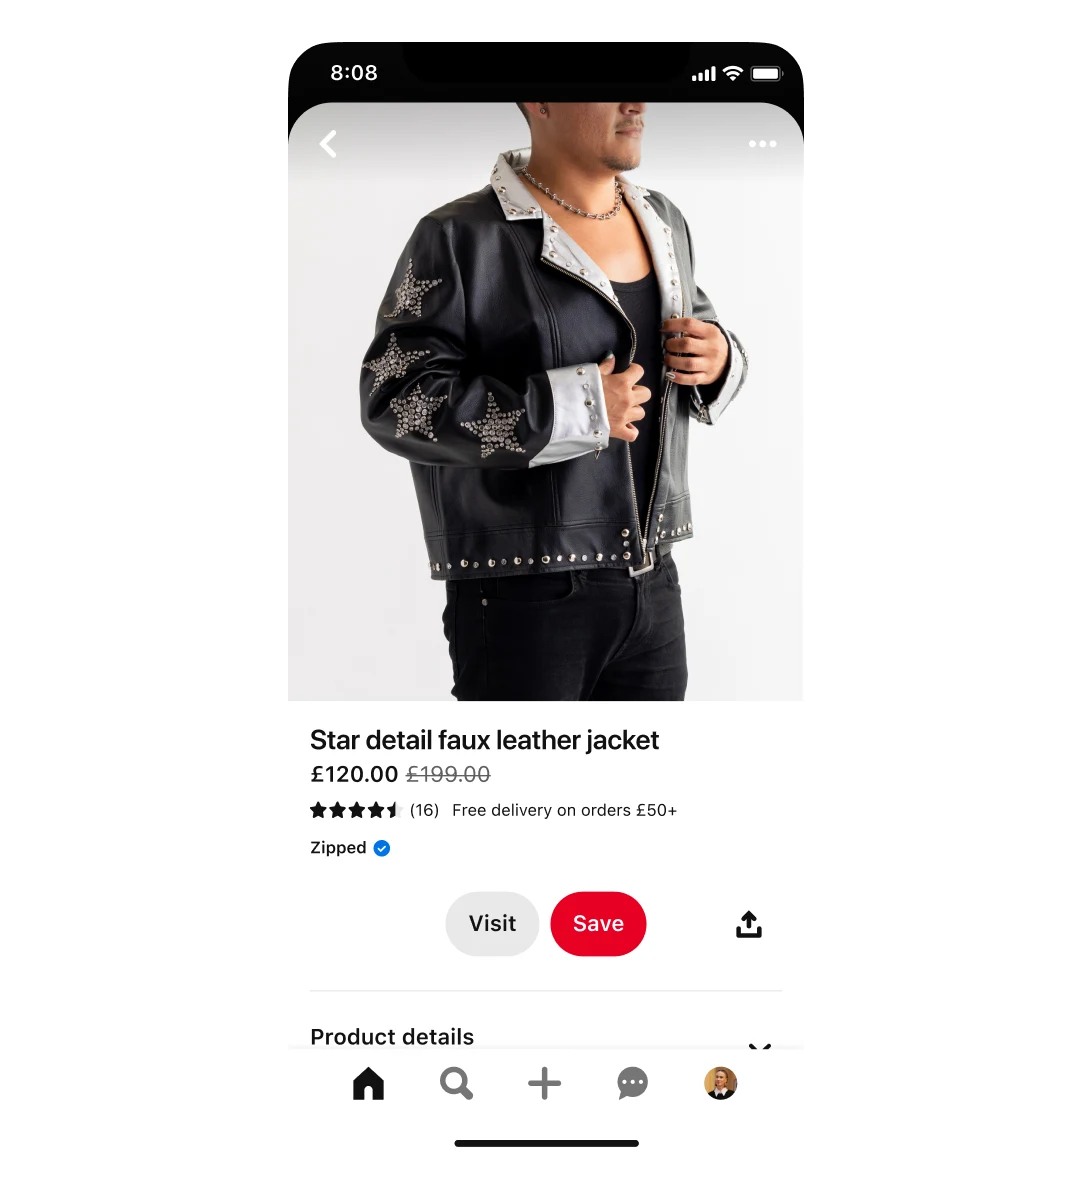 Mobile view of a shopping ad for a faux leather jacket with star detail. The jacket is on sale for £120, marked down from £199. The ad features a man wearing the jacket.